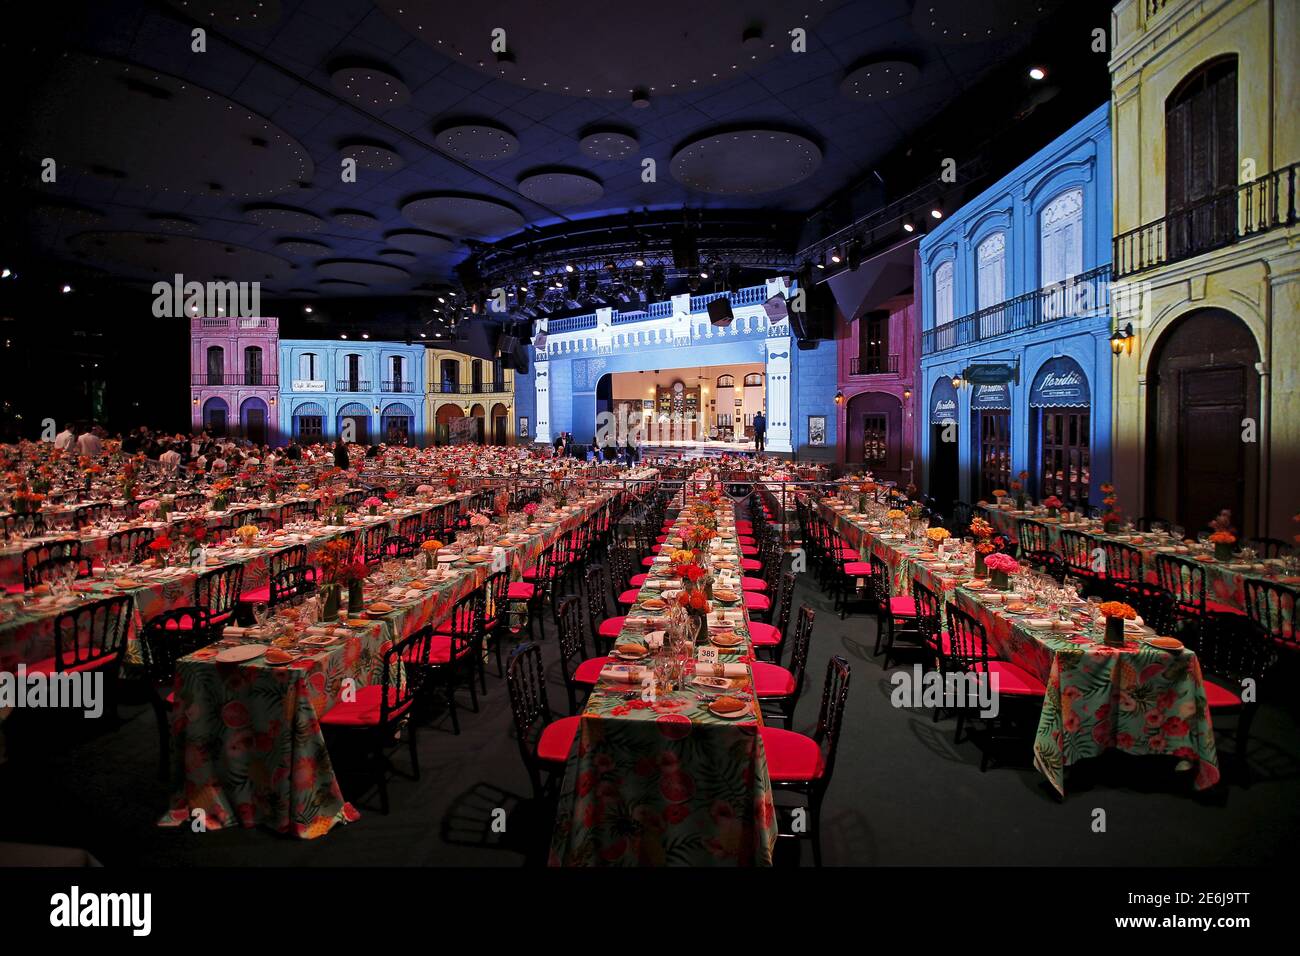 A general view of the table decorations in the "Salle Des Etoiles" (Stars  Room) at the Monte Carlo Sporting is seen during the Bal de la Rose event  in Monaco March 19,